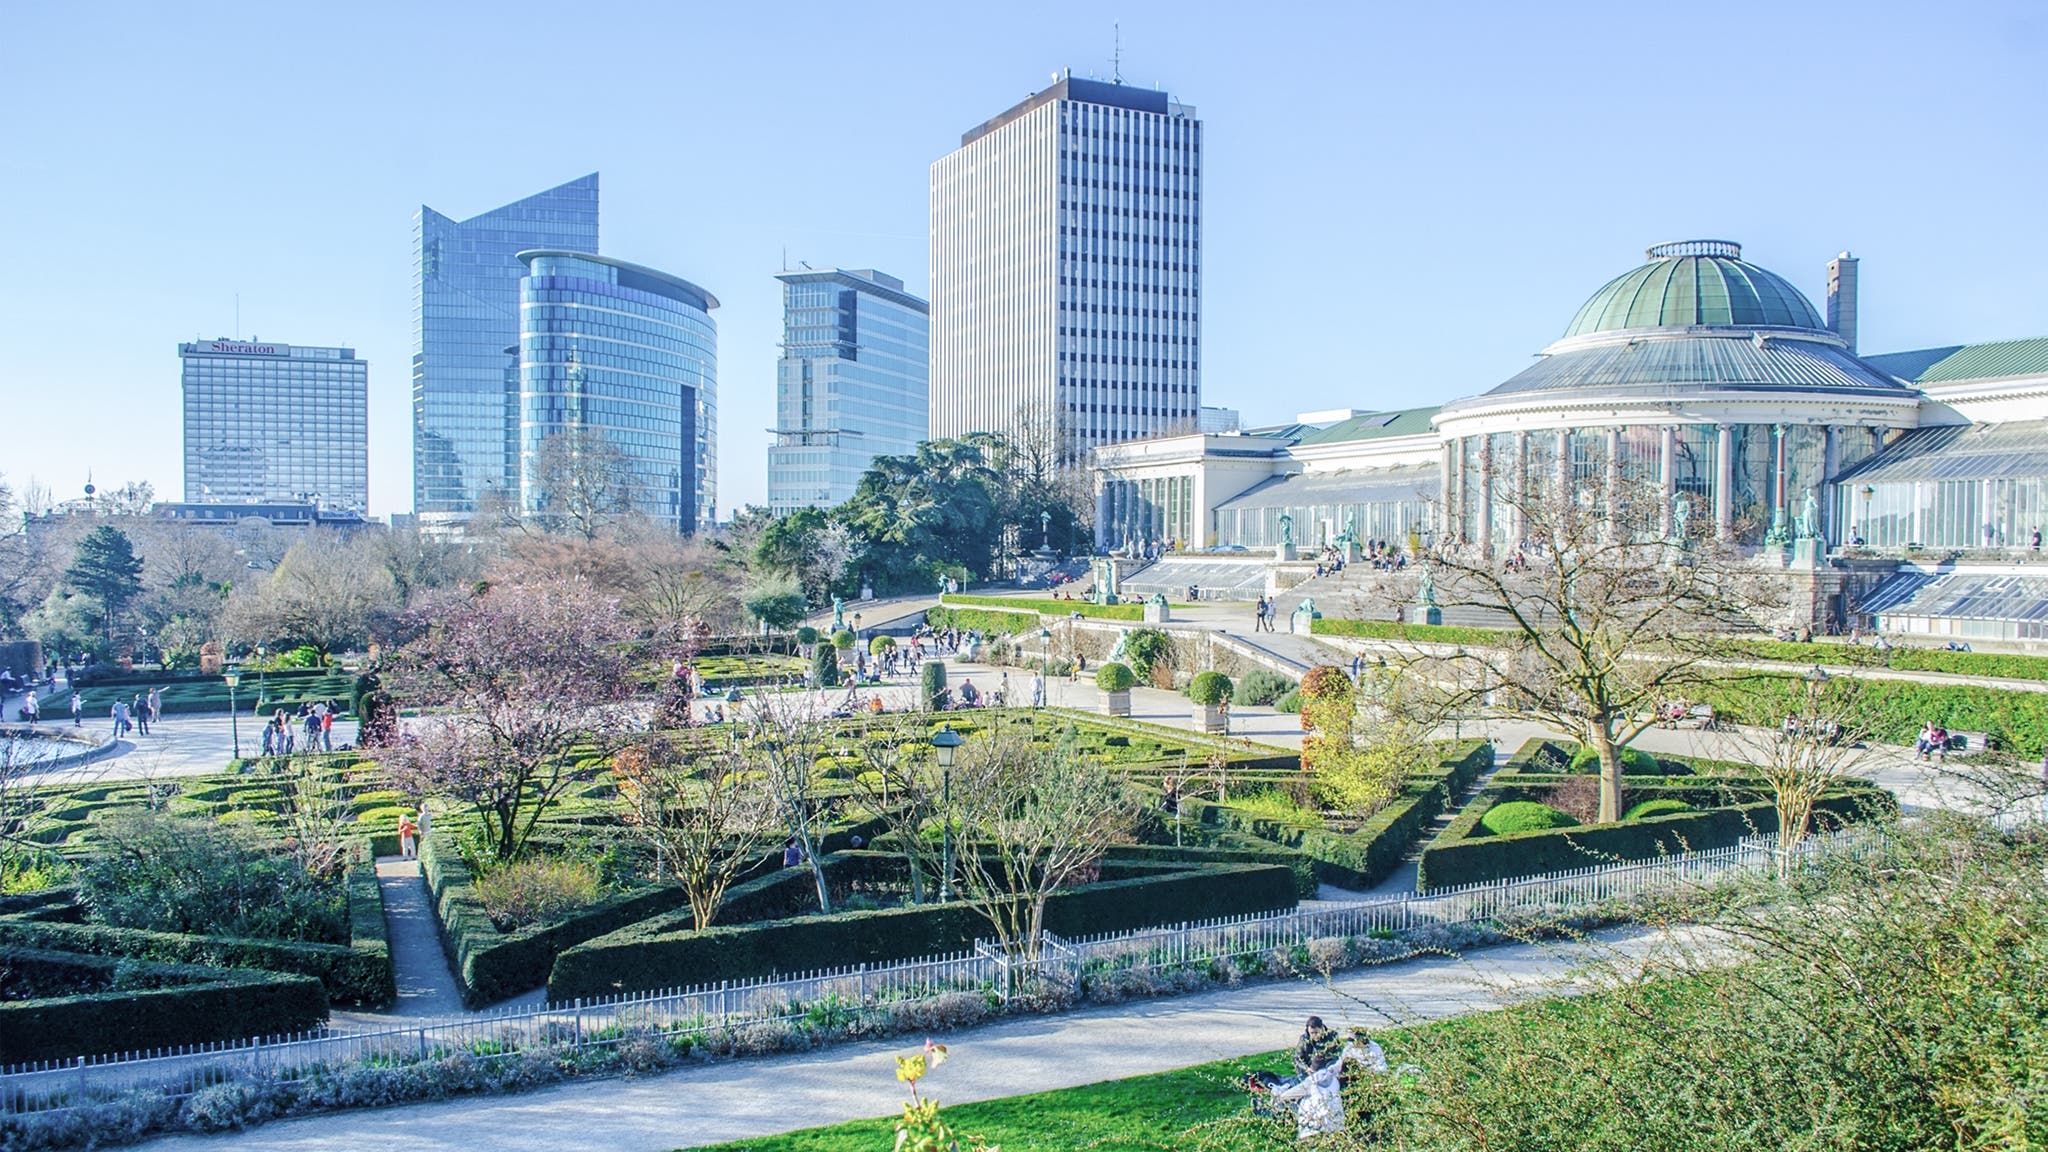 The Jardin Botanique and modern skyscrapers in Brussels, Belgium